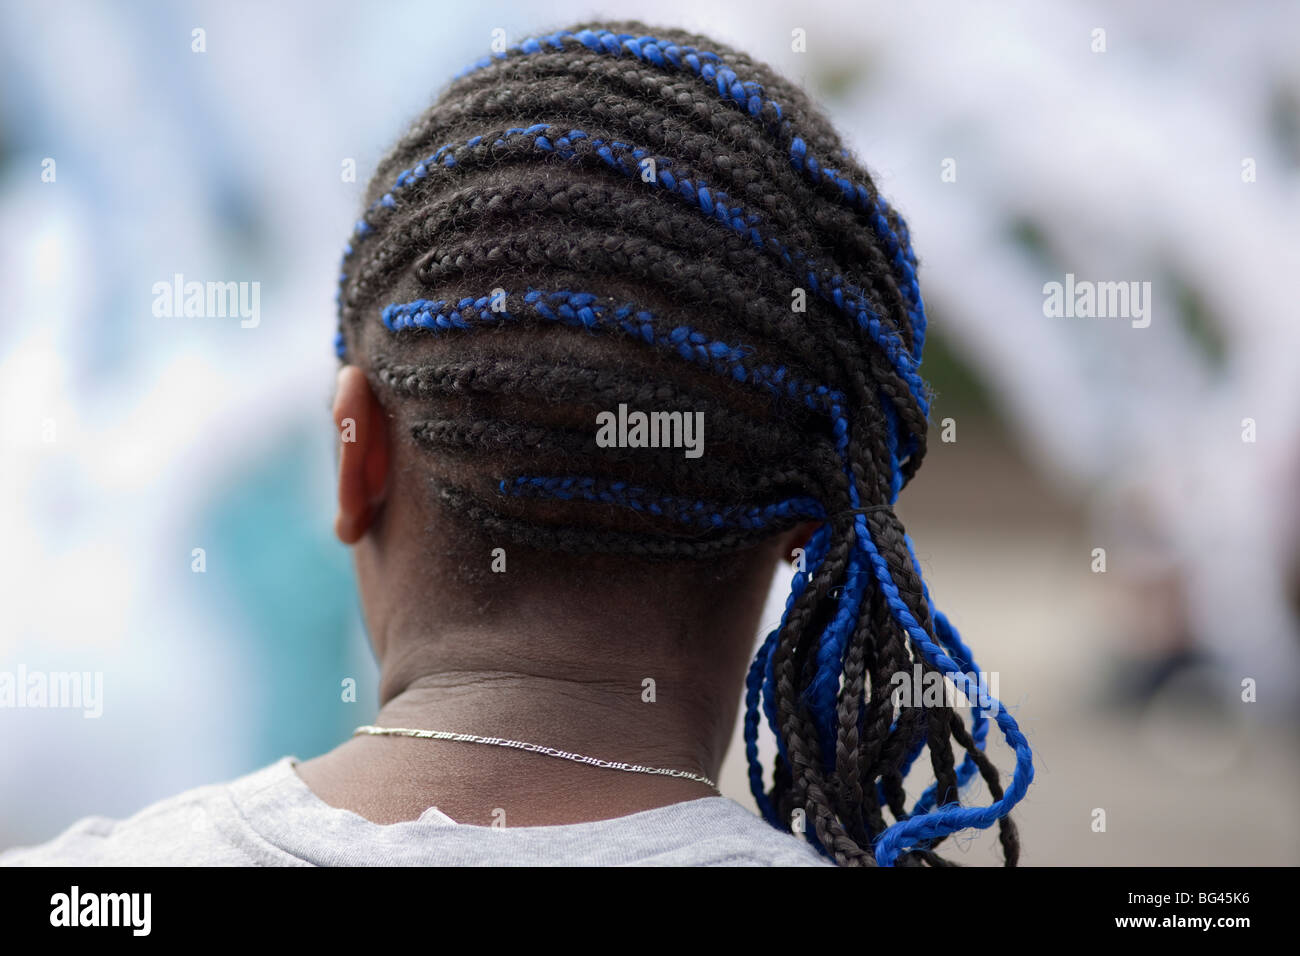 England, London, Notting Hill Carnival, Cornrow Hairstyle Stock Photo